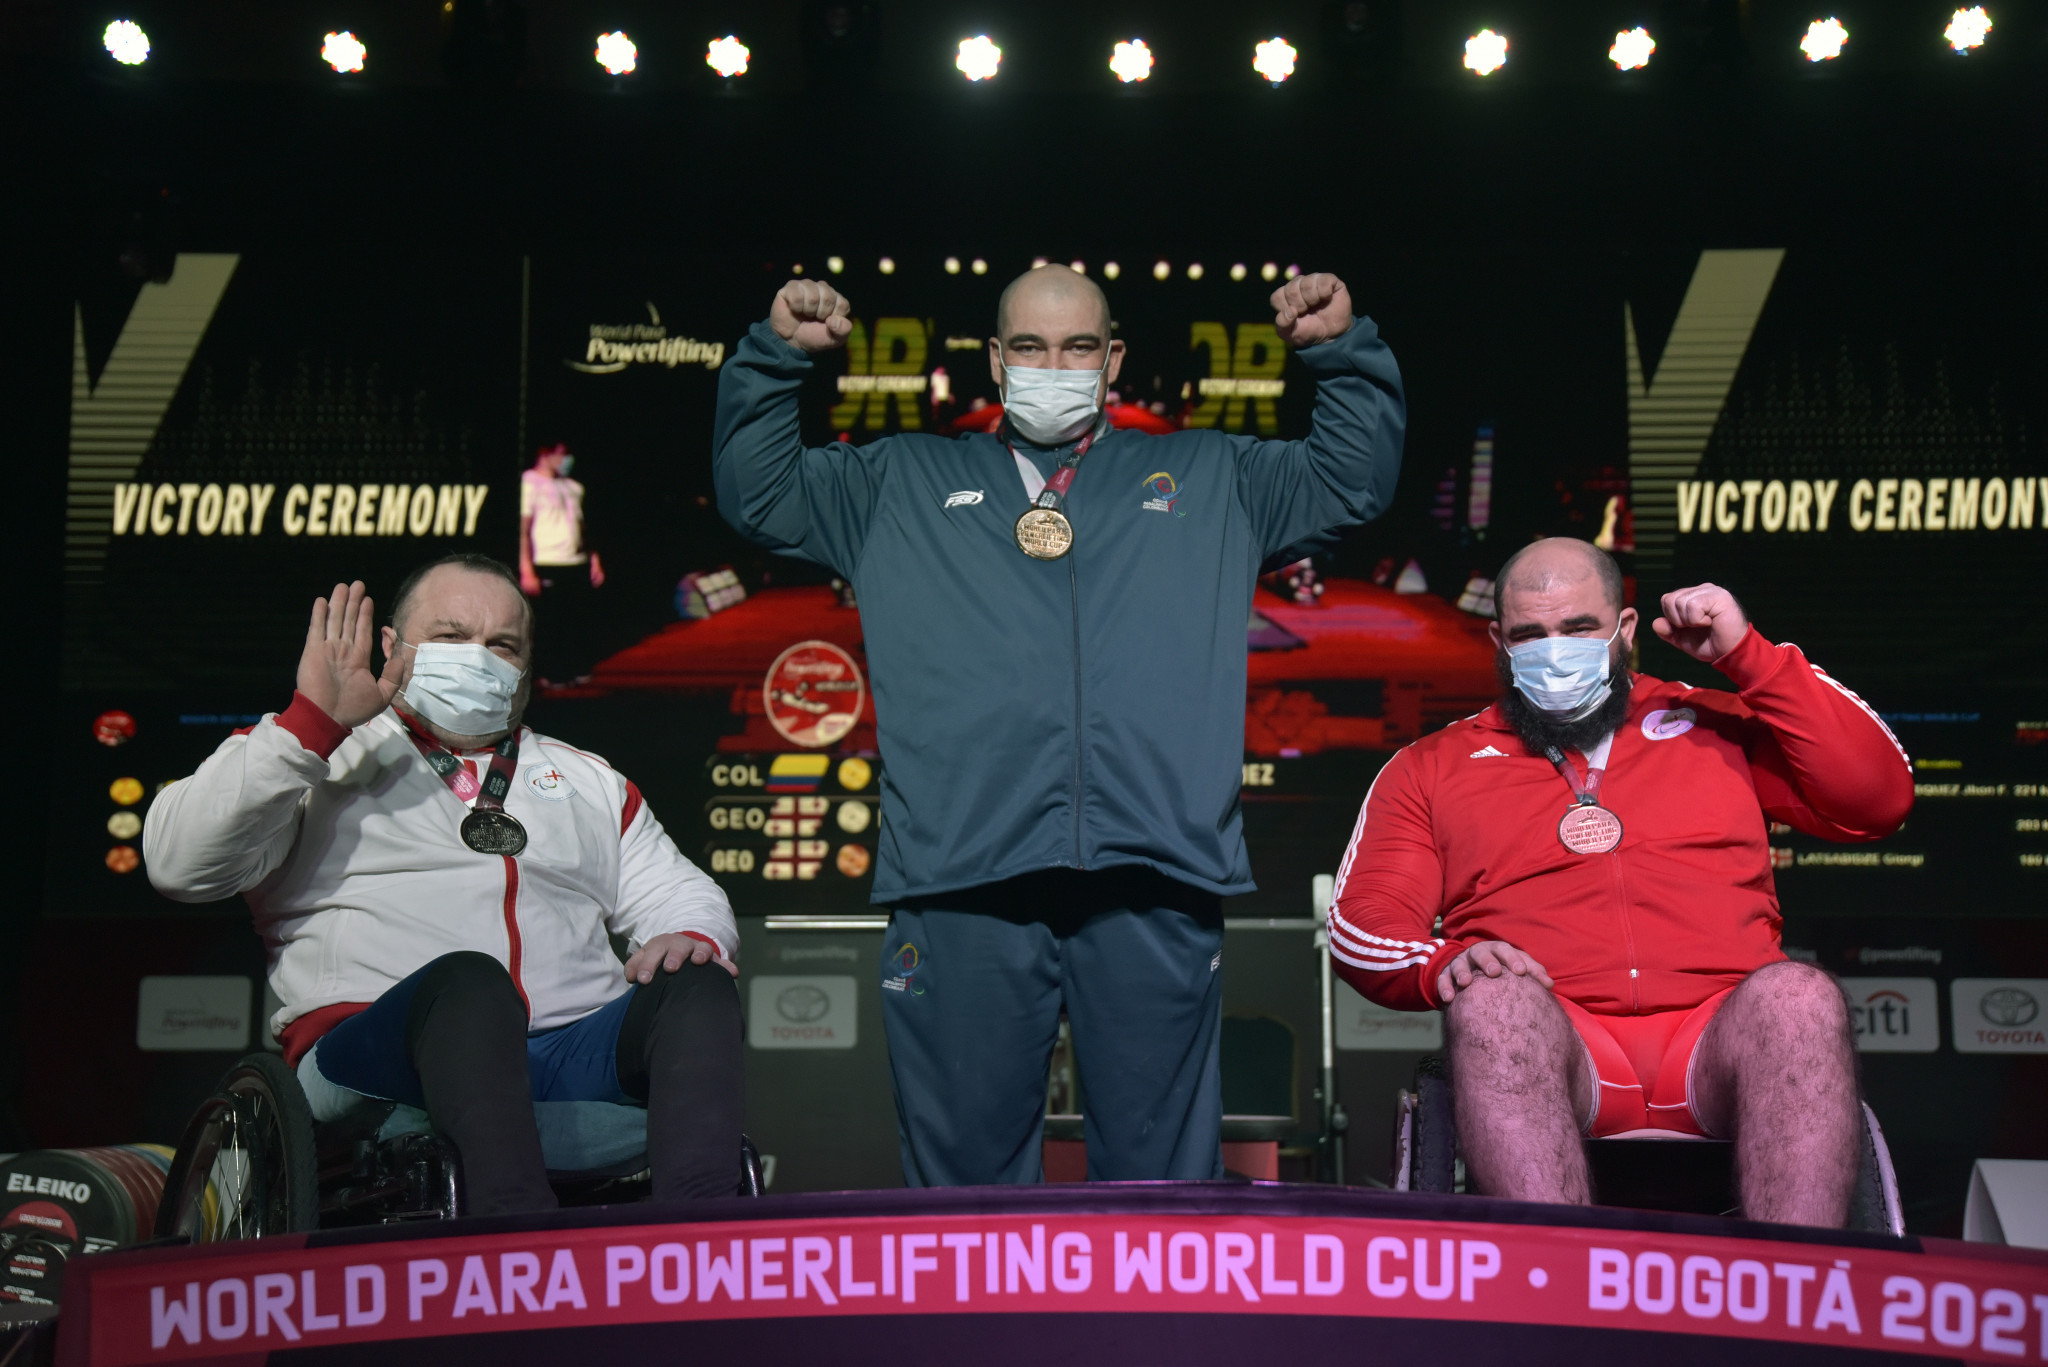 Bangkok in Thailand is scheduled to host the third World Para Powerlifting World Cup of the season following events in Manchester and Bogota ©Getty Images